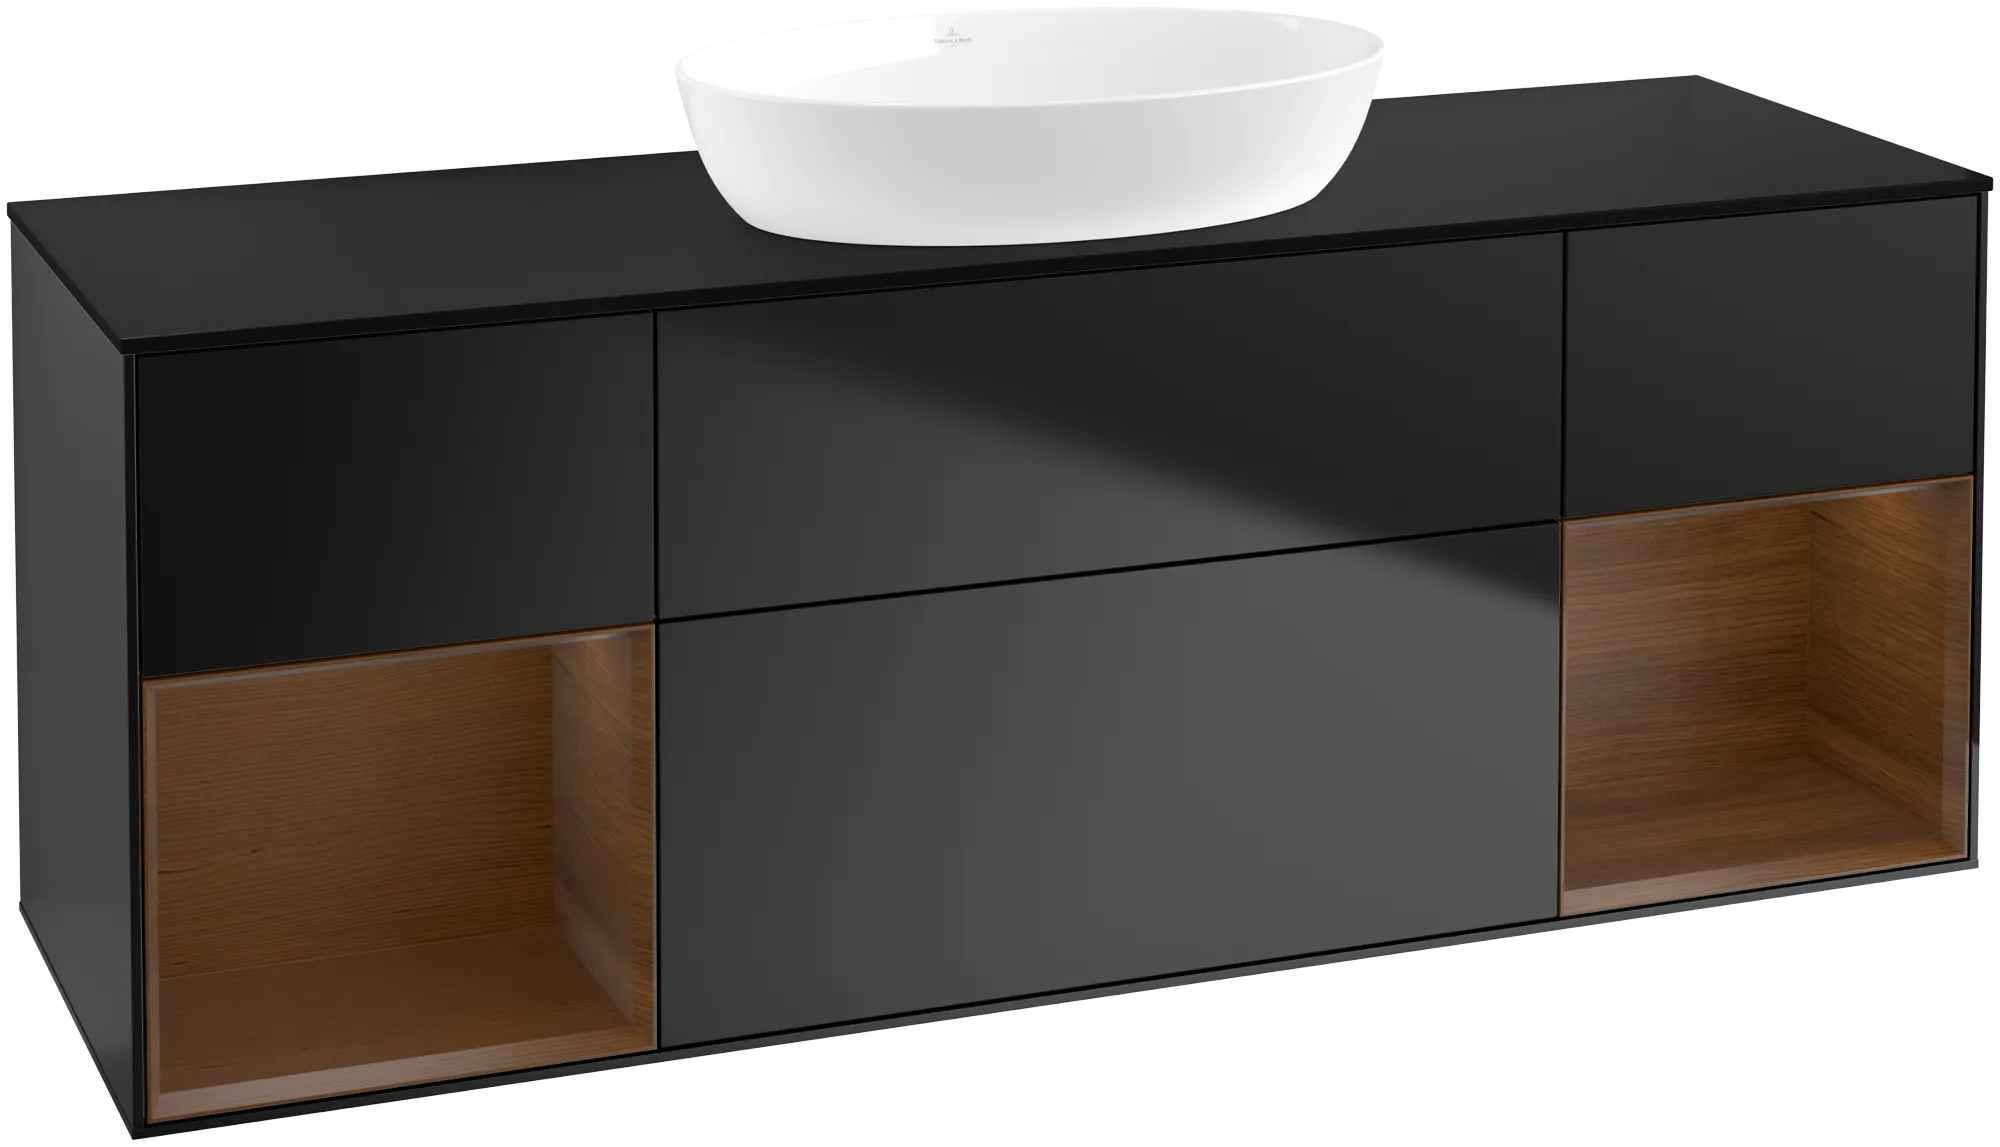 Picture of VILLEROY BOCH Finion Vanity unit, with lighting, 4 pull-out compartments, 1600 x 603 x 501 mm, Black Matt Lacquer / Walnut Veneer / Glass Black Matt #GD02GNPD